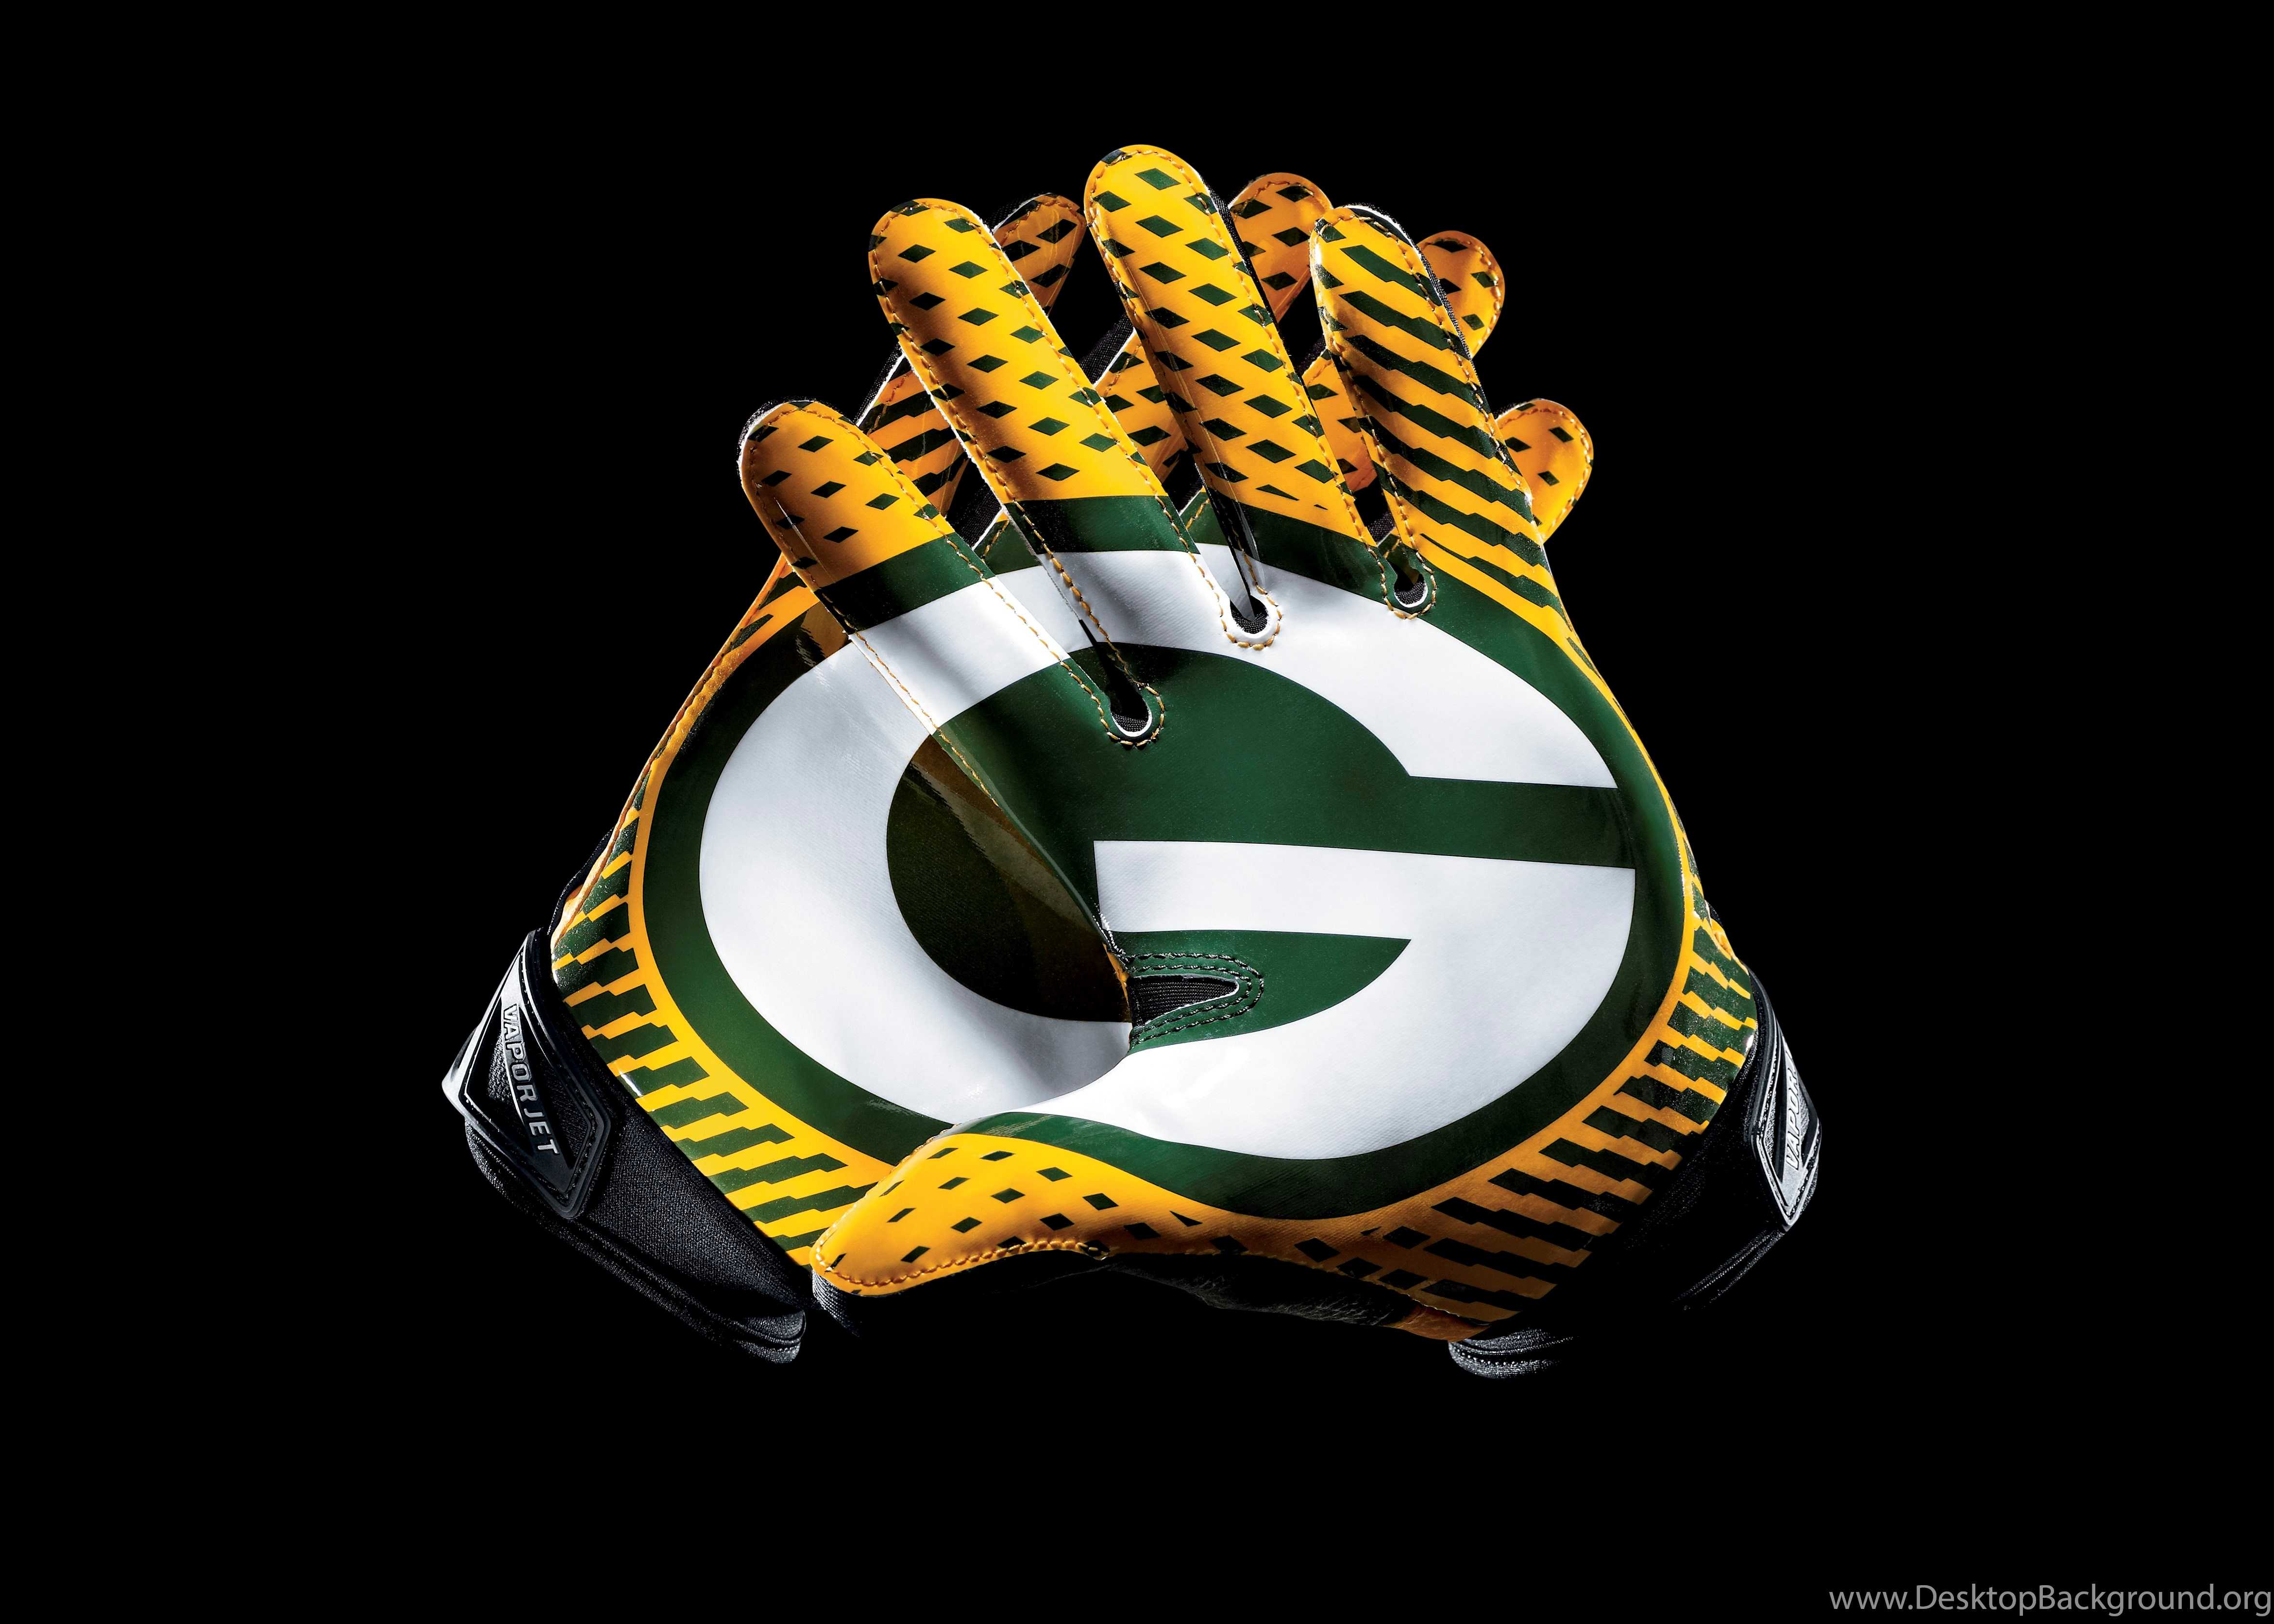 Green Bay Packers 4k Wallpapers - Wallpaper Cave